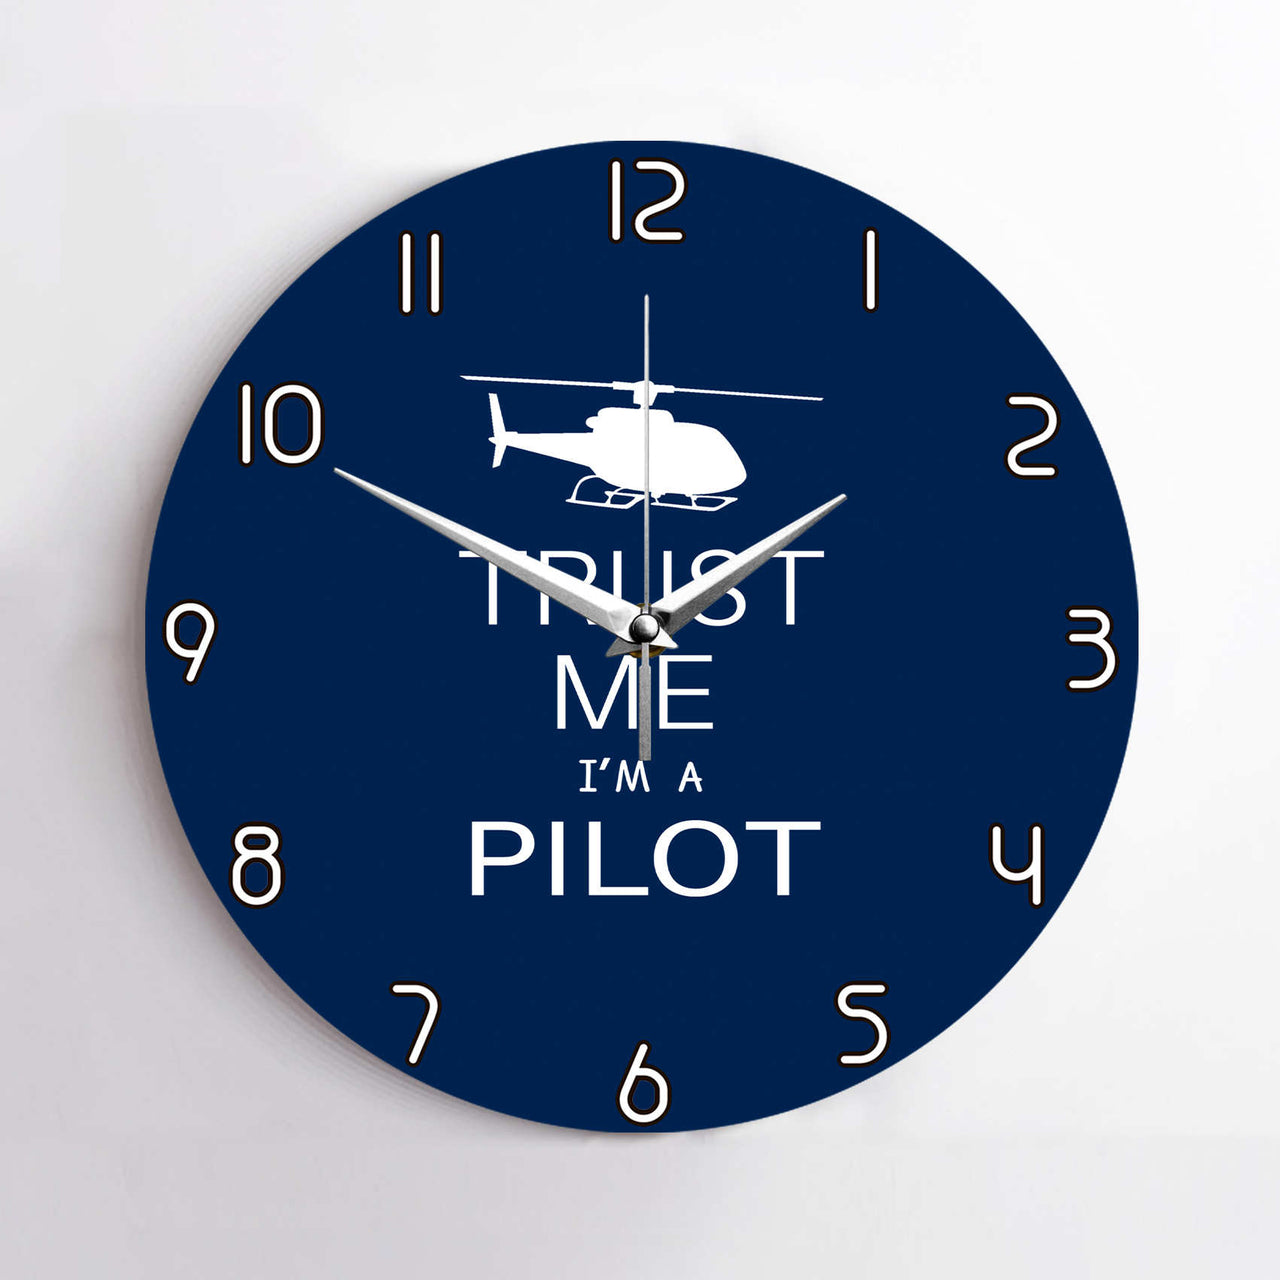 Trust Me I'm a Pilot (Helicopter) Designed Wall Clocks